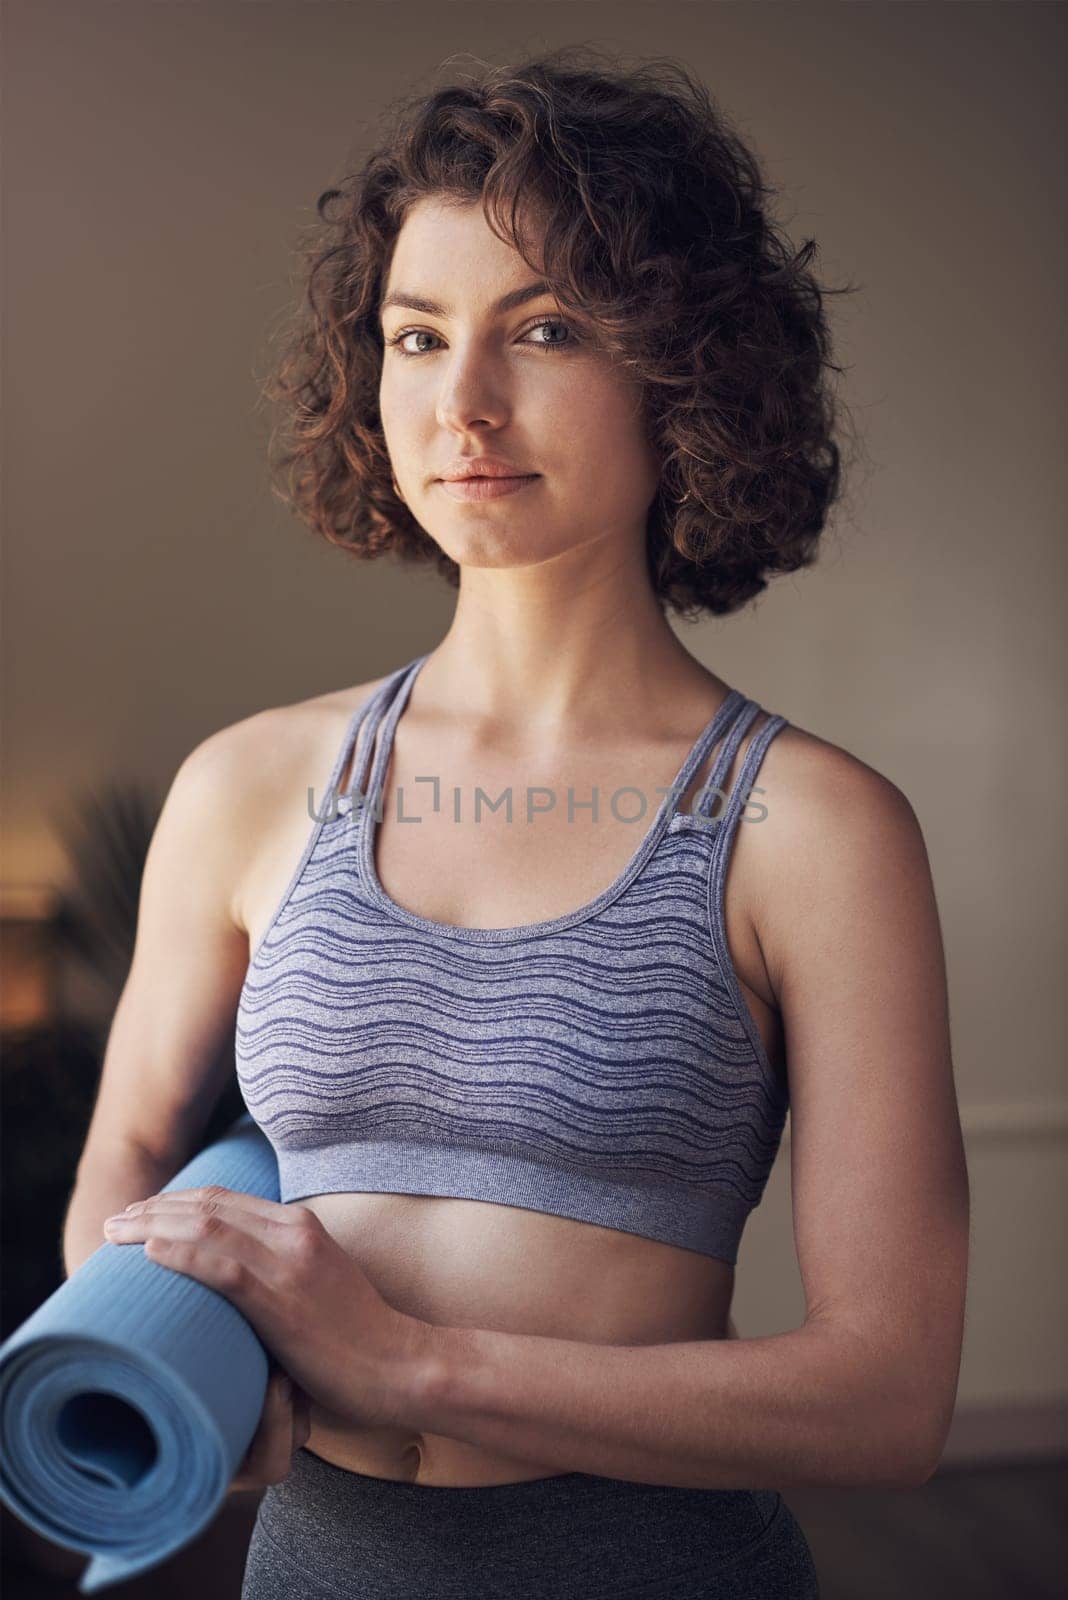 A day without yoga is a day wasted. Cropped portrait of an attractive young woman standing alone and holding her yoga mat before an indoor yoga session